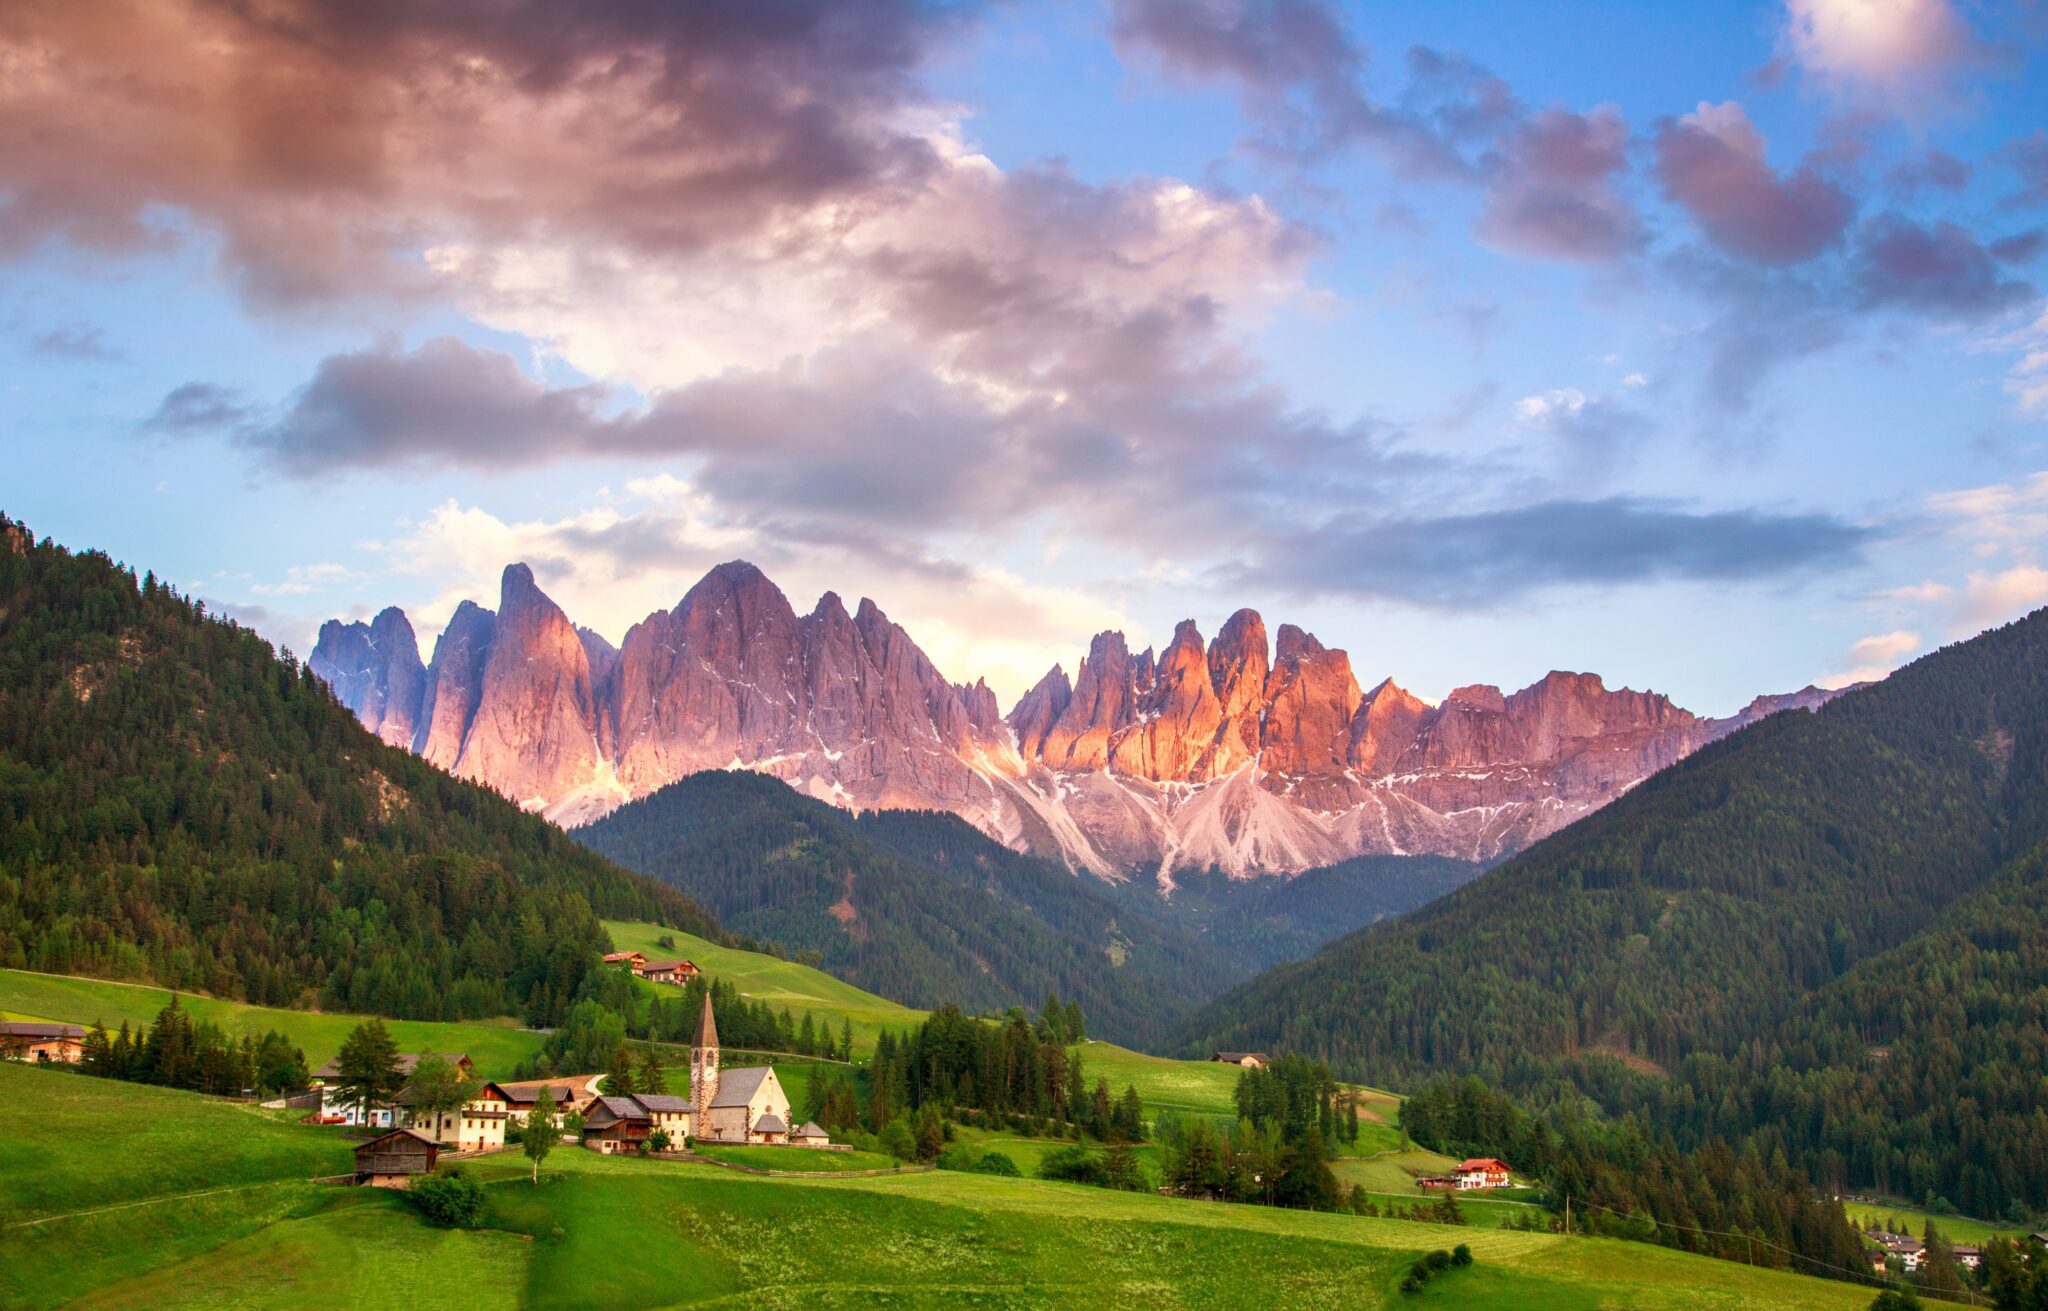 <p>Italy remains a top choice for European getaways, with Rome topping many dream vacation lists. However, the Italian countryside can be more beautiful than the big cities, and what better way to get out and about than on a classic Italian road trip?</p> <p>As summer draws closer, we found a recent study of Instagram hashtags that we used to determine Italy’s 16 most Instagrammable road trips. After all, if you’re on a dream vacation and taking dreamy pictures, it doesn’t count unless you post them on social media…lol!</p>